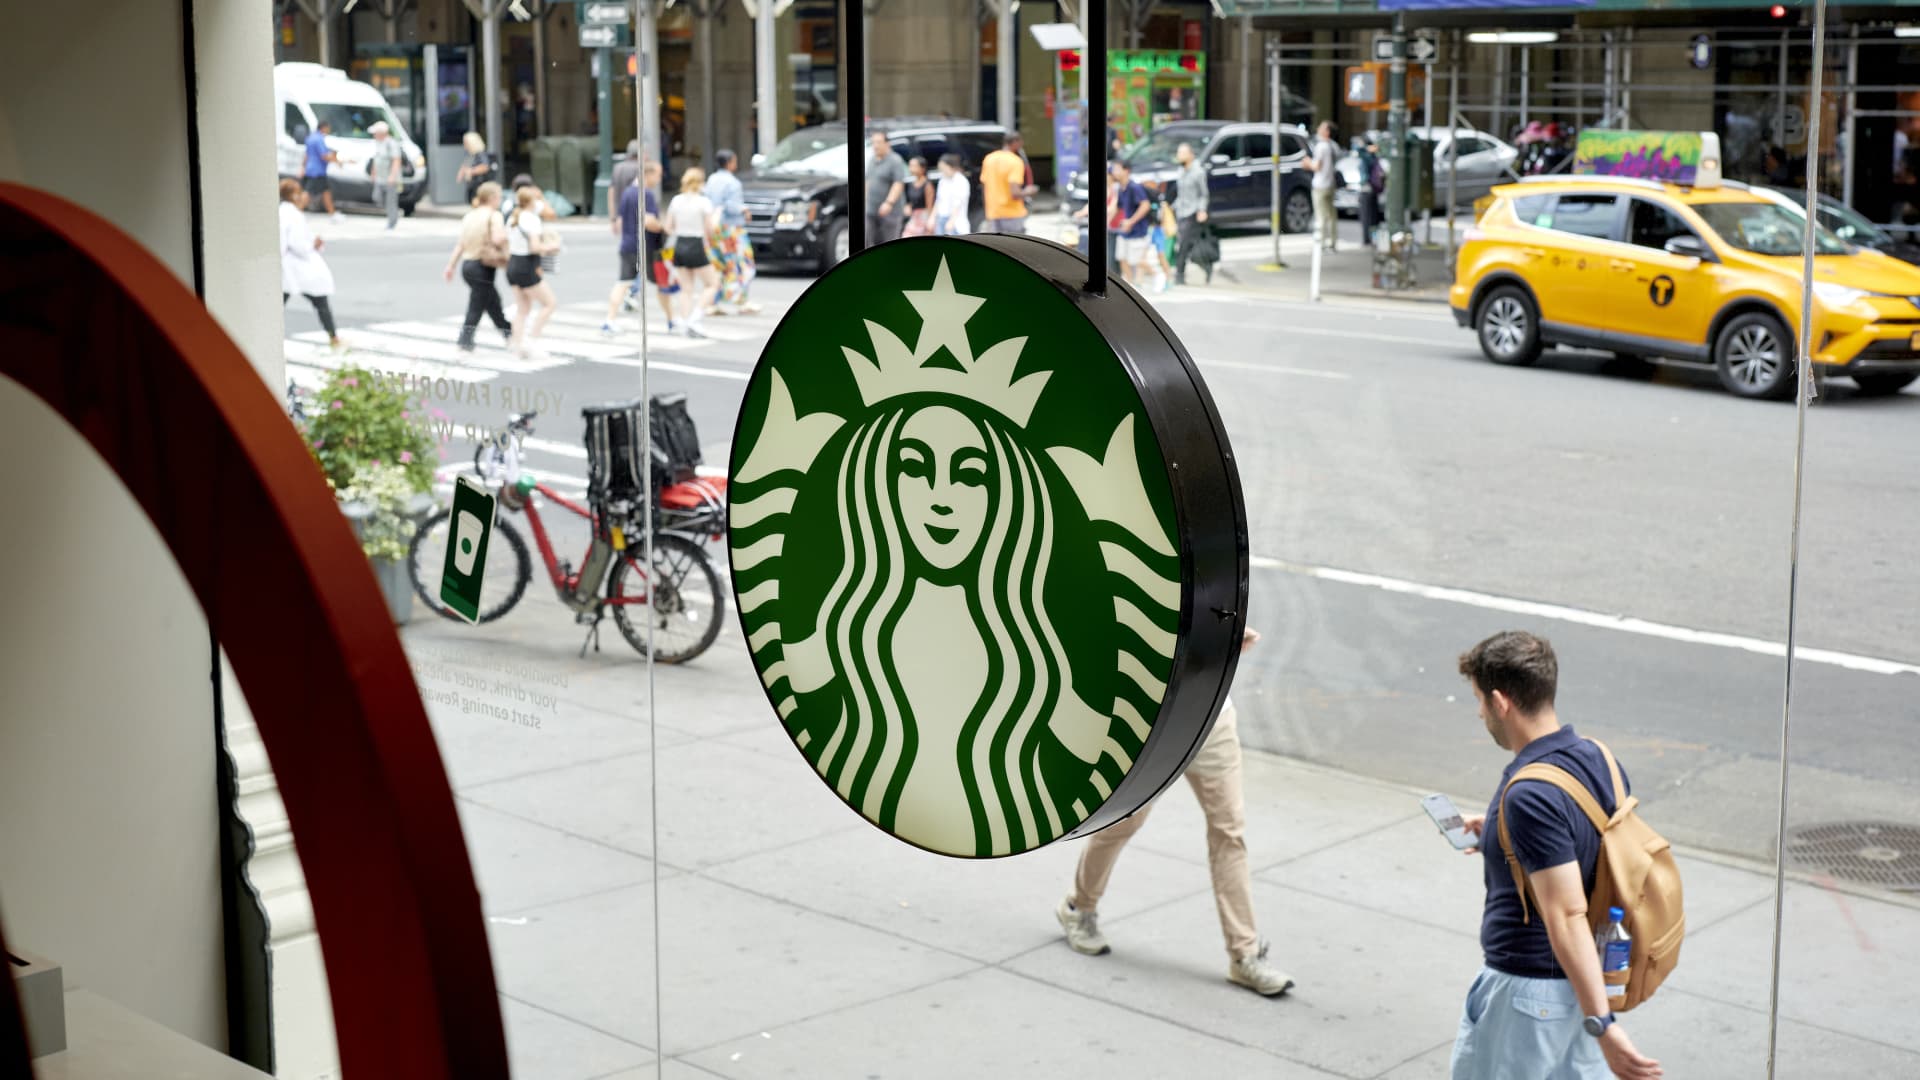 Here's why Starbucks shares can rally after a quarterly earnings miss